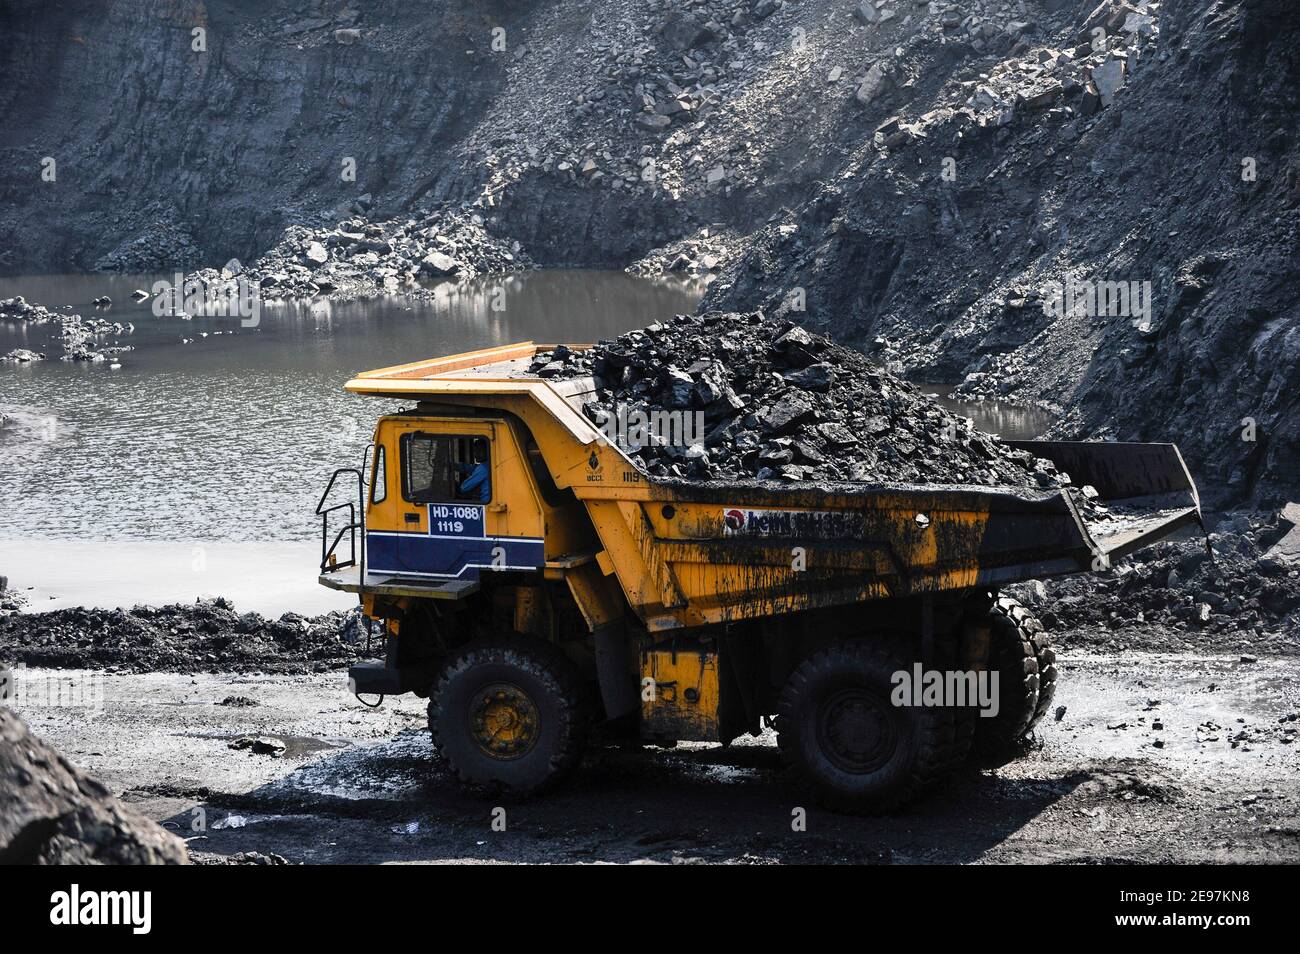 INDIA Dhanbad, open-cast coal mining of BCCL Ltd a company of COAL INDIA, large BEML dumper for coal transport from the mine / INDIEN Dhanbad , offener Kohle Tagebau von BCCL Ltd. ein Tochterunternehmen von Coal India Stock Photo